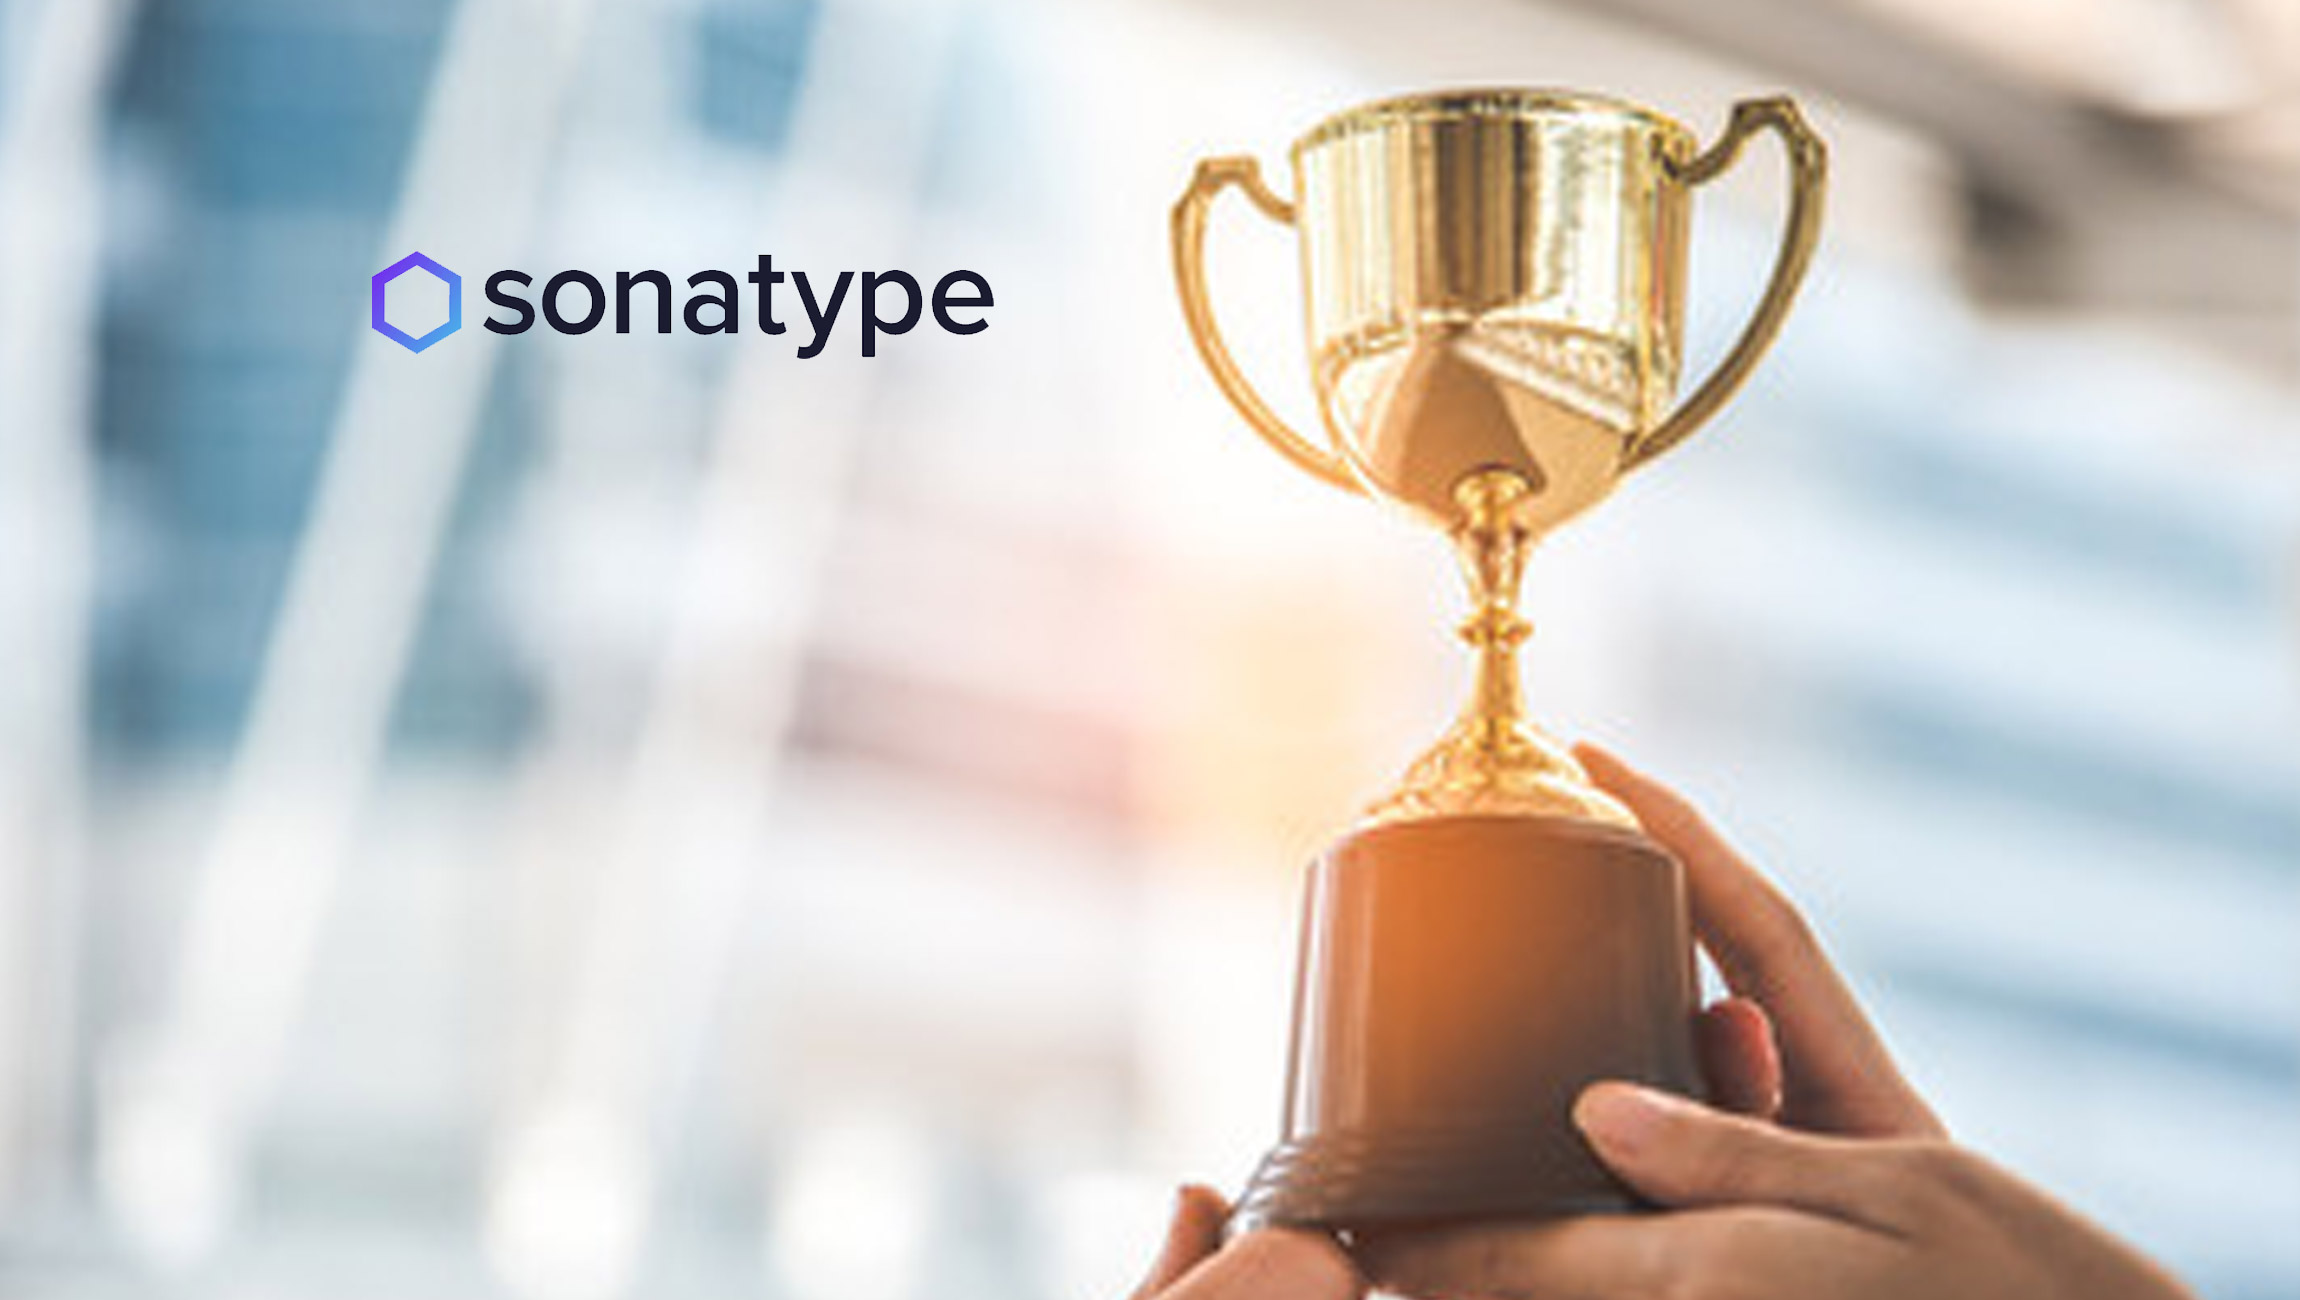 Sonatype Wins Multiple Awards for Product Excellence and Innovation